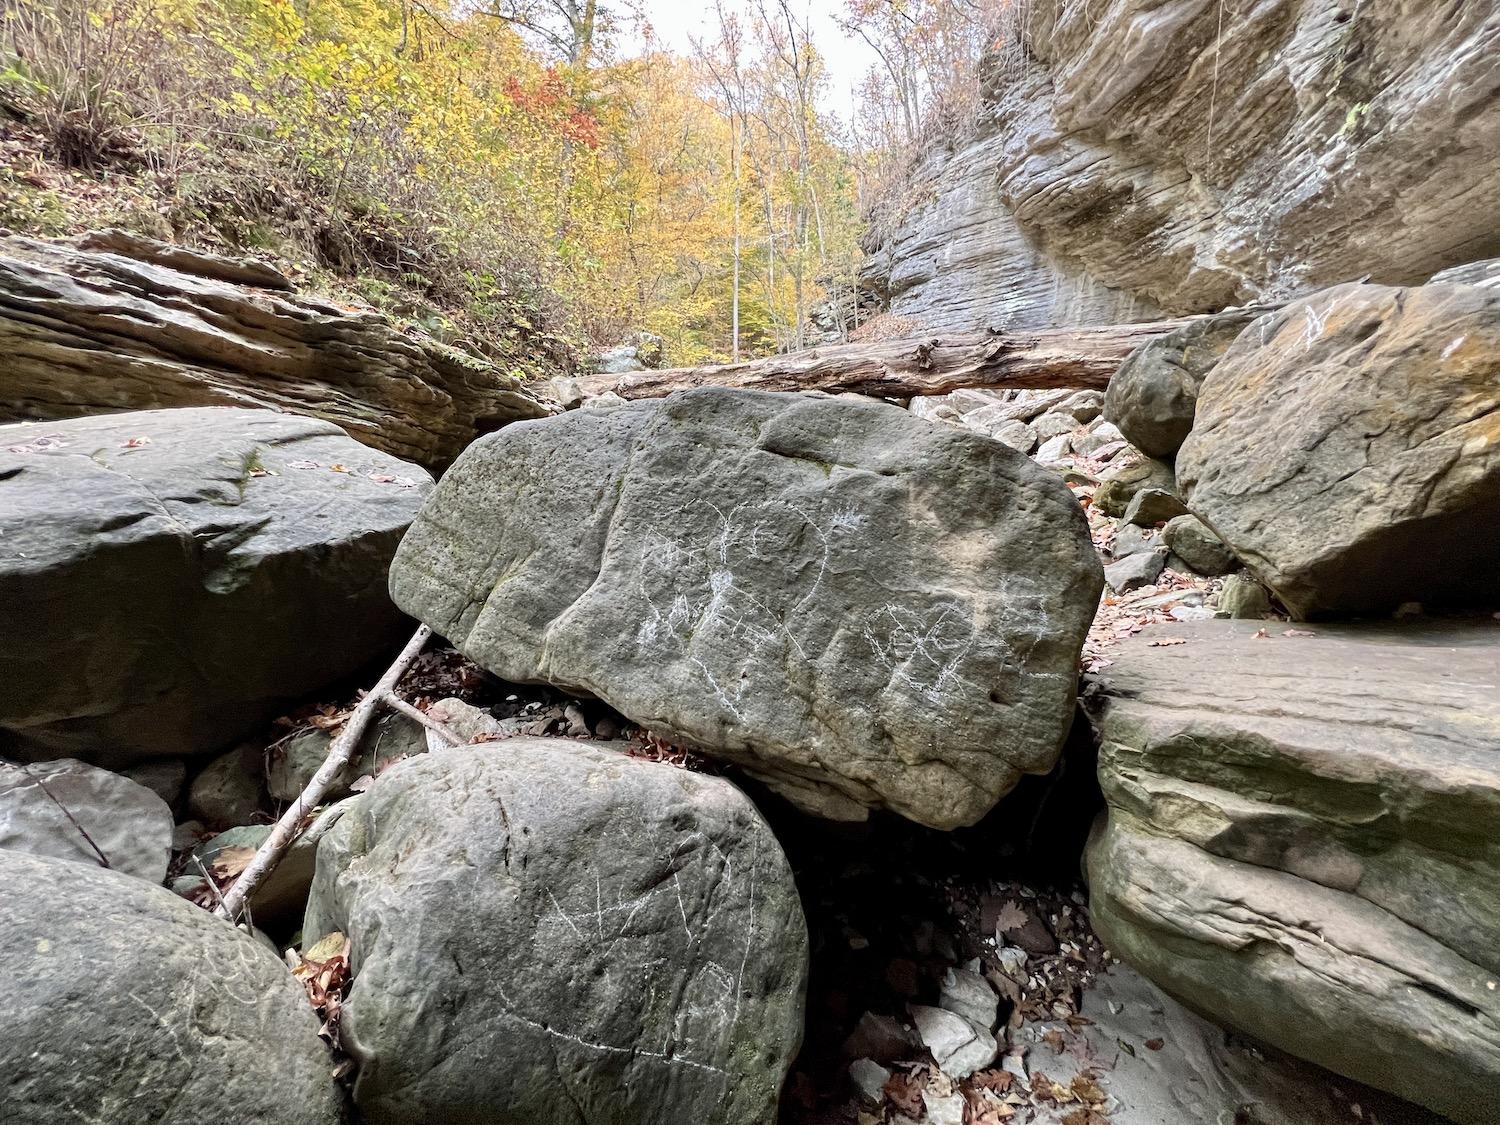 People are still compelled to scrawl graffiti in the Buffalo National River, although it's illegal.